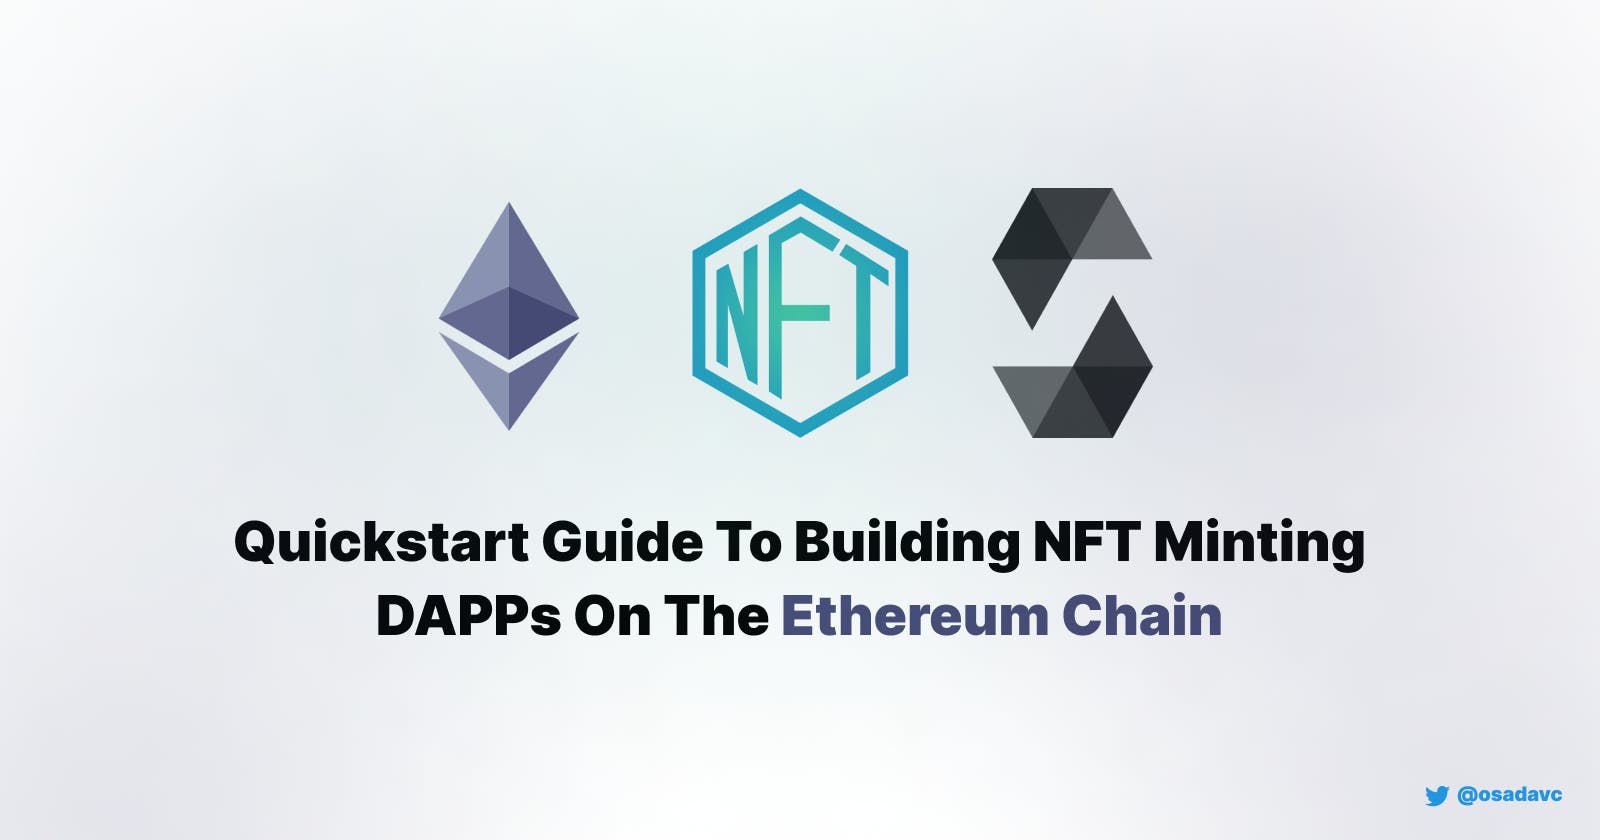 Quickstart Guide To Building NFT Minting DAPPs On The Ethereum Chain